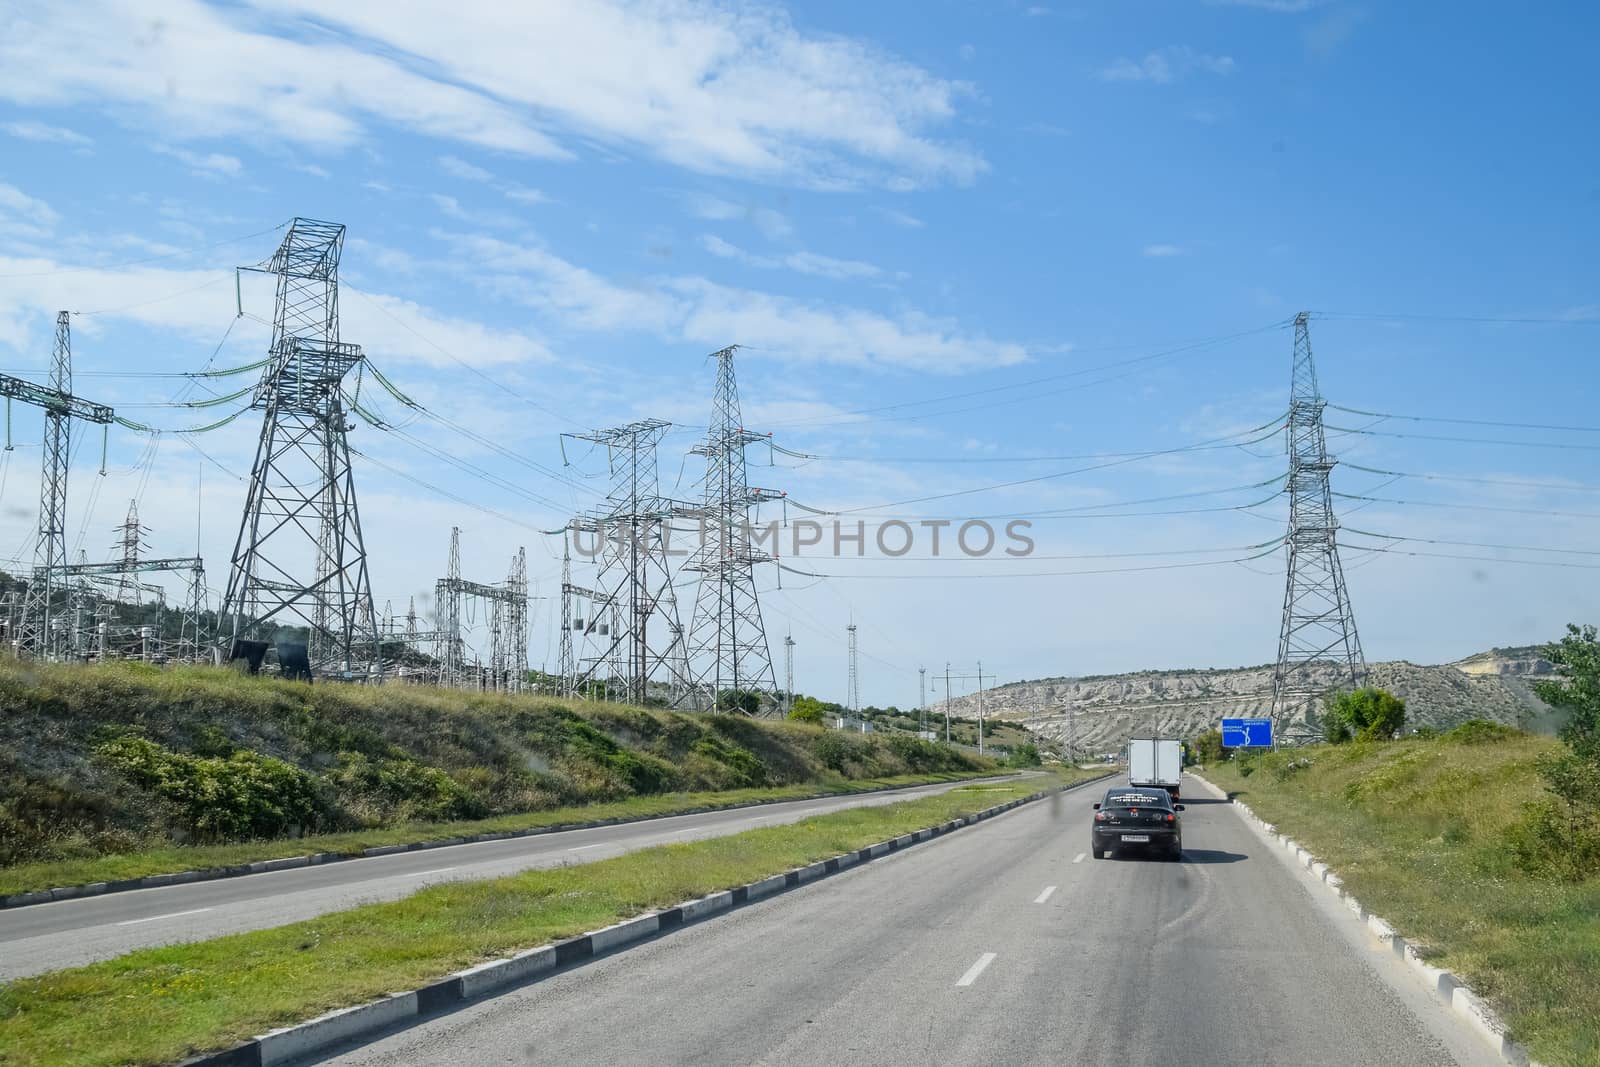 Crimean landscapes, driving on the roads of Crimea. Suburbs and villages and fields and trails of The Crimea.